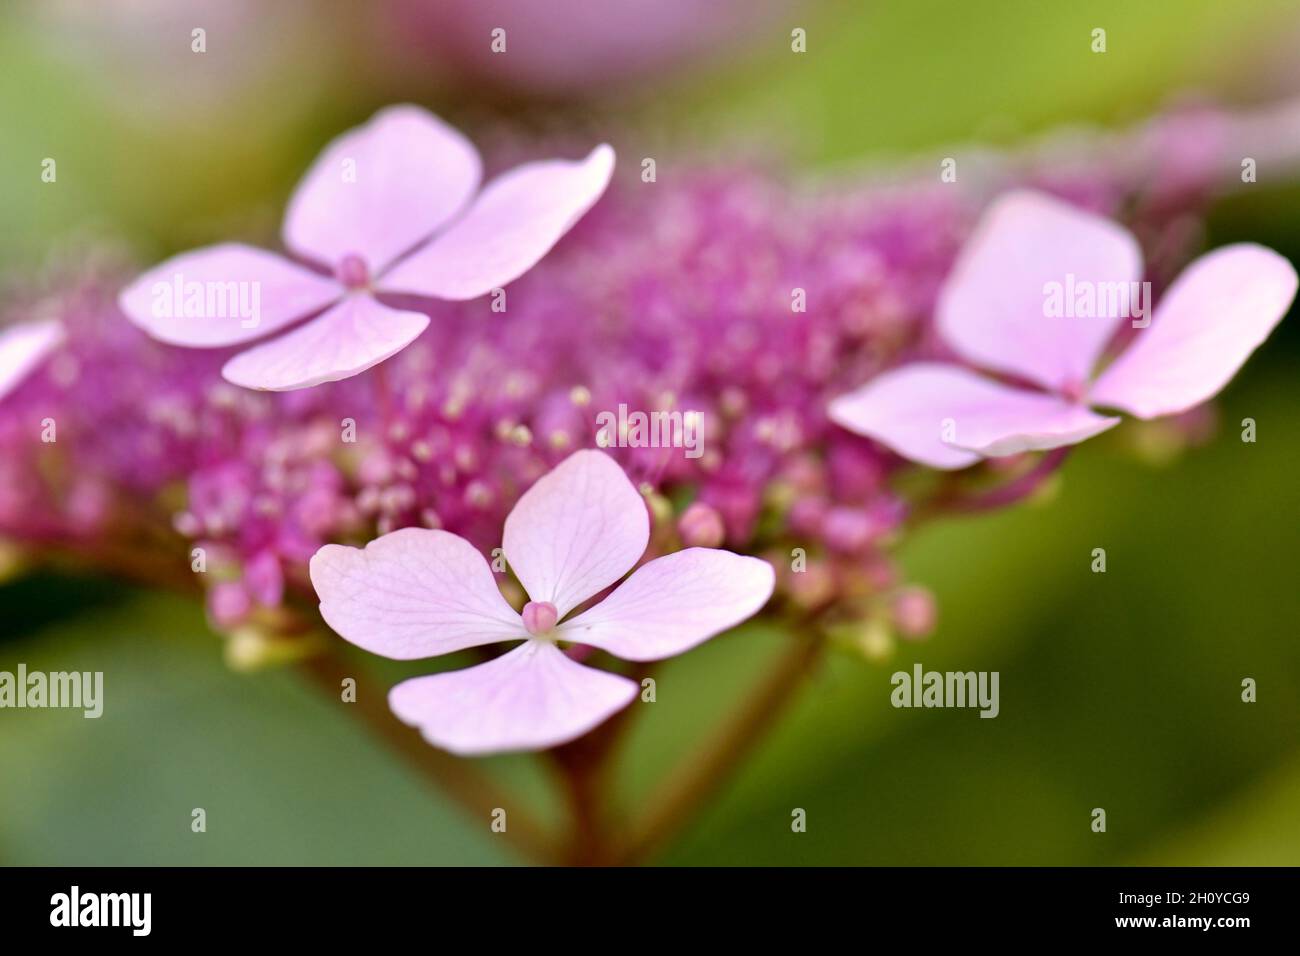 Beautiful flowering pink Hydrangea against an out of focus green leafy background Stock Photo